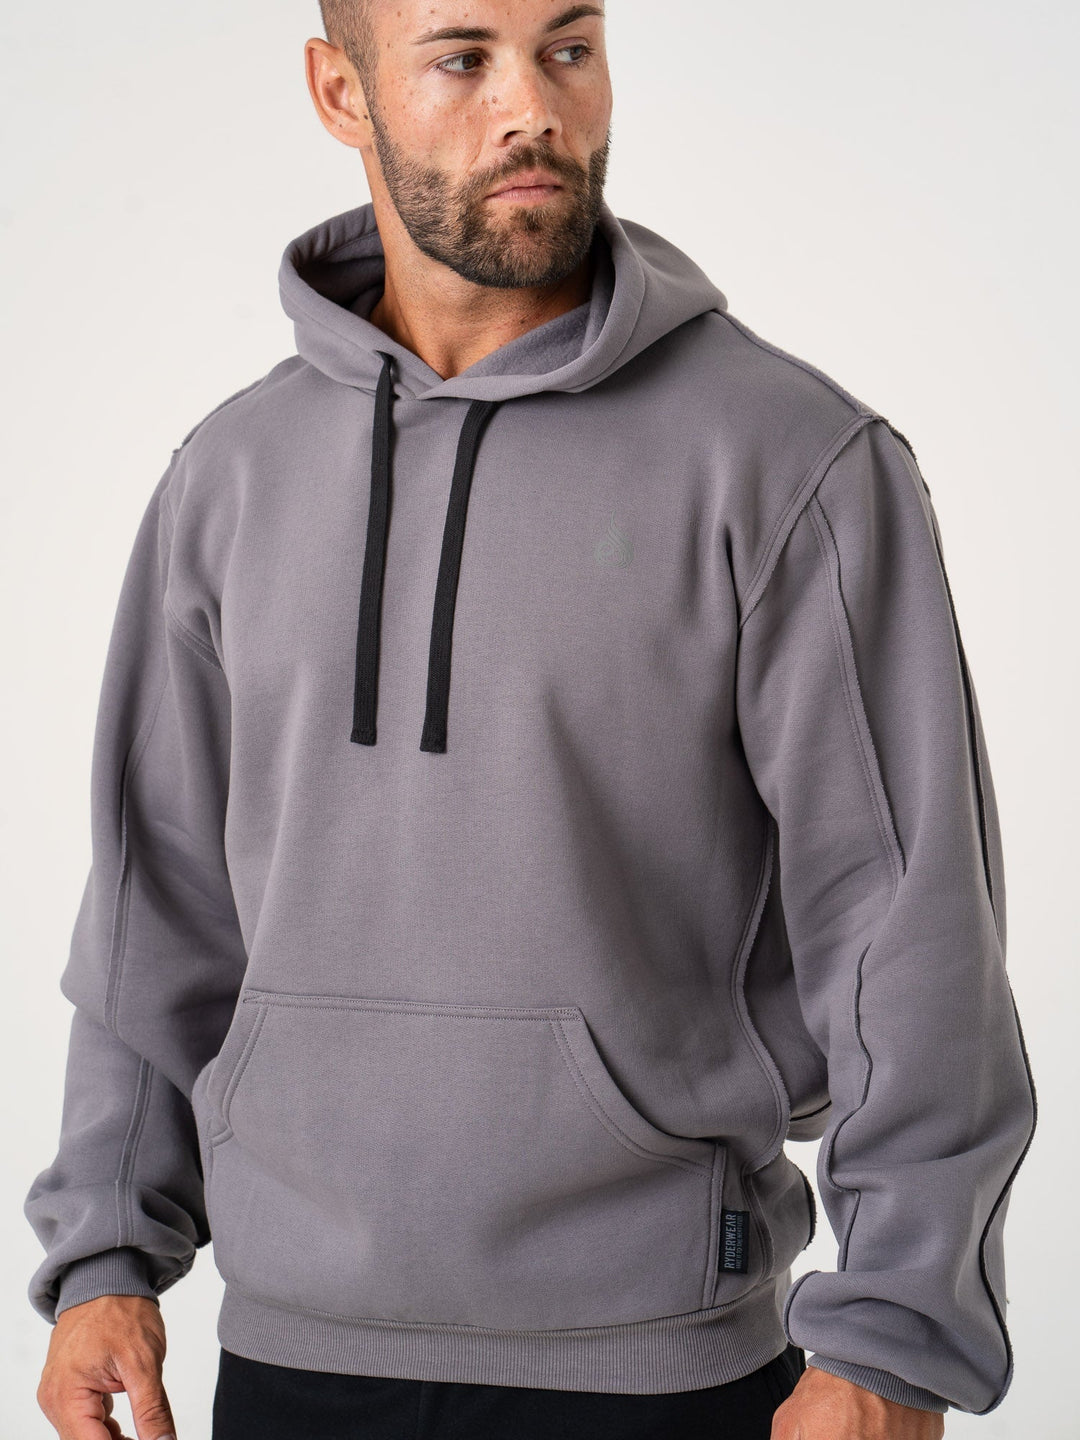 Force Hoodie - Charcoal Clothing Ryderwear 